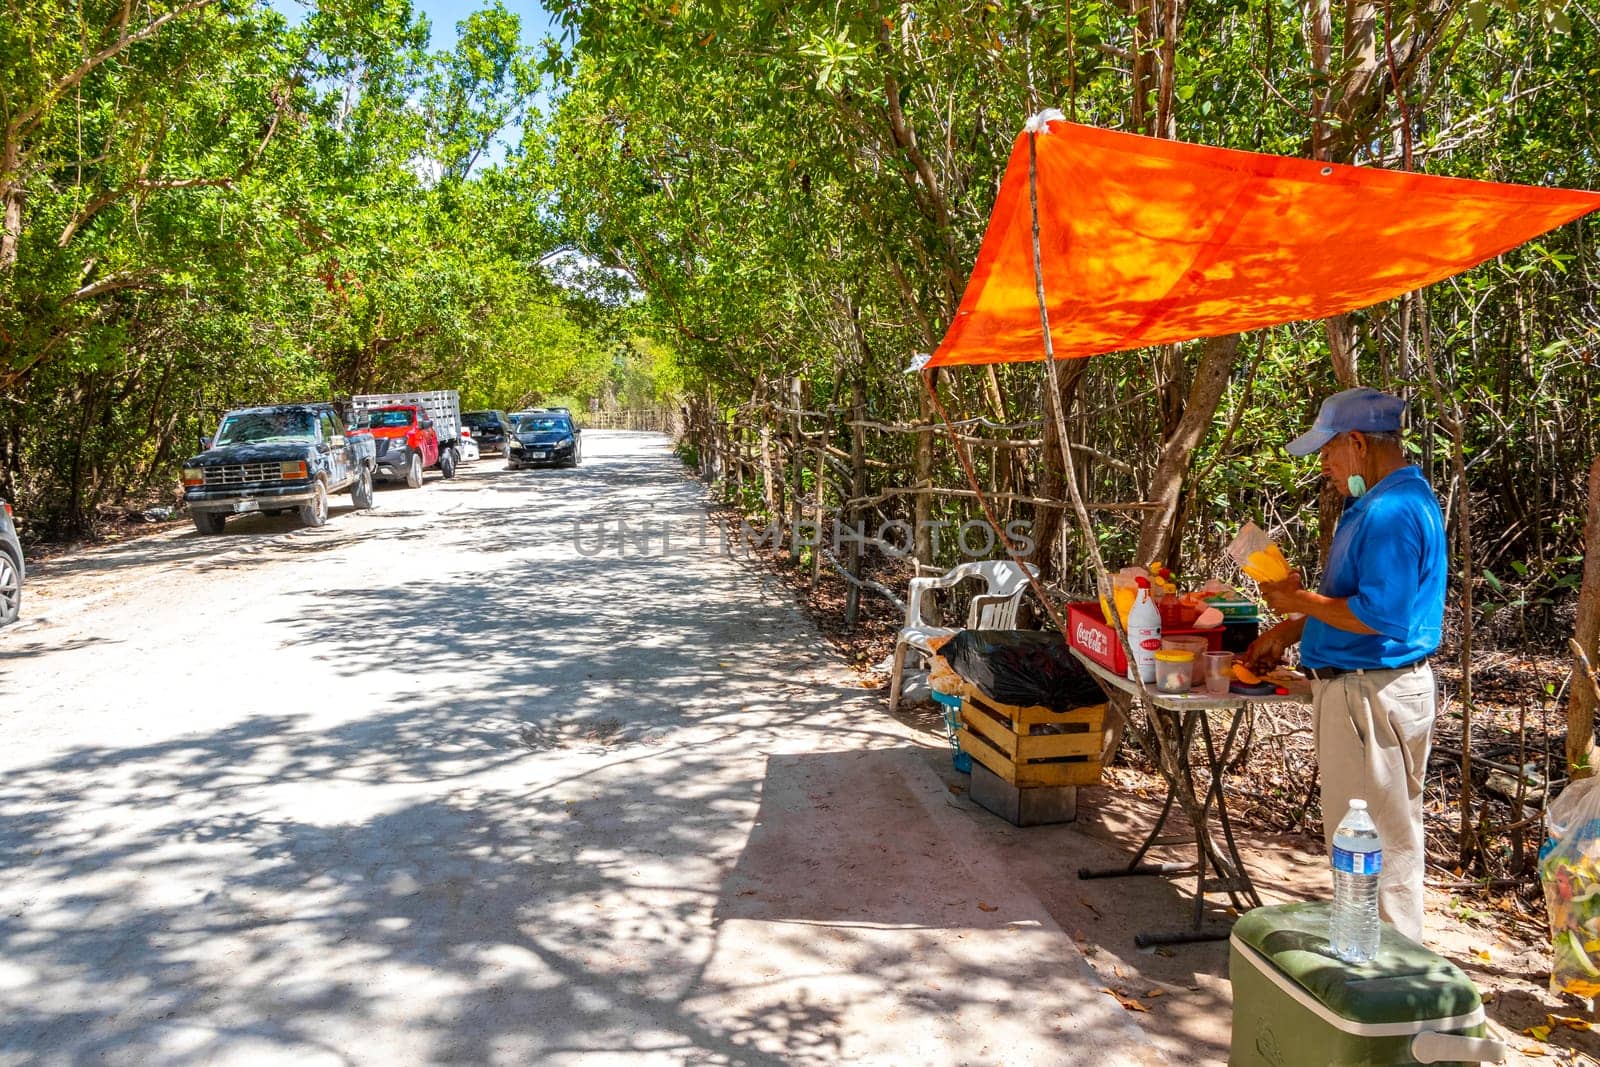 Street Food with transportation outdoor in the tropical nature and city in Playa del Carmen Quintana Roo Mexico.